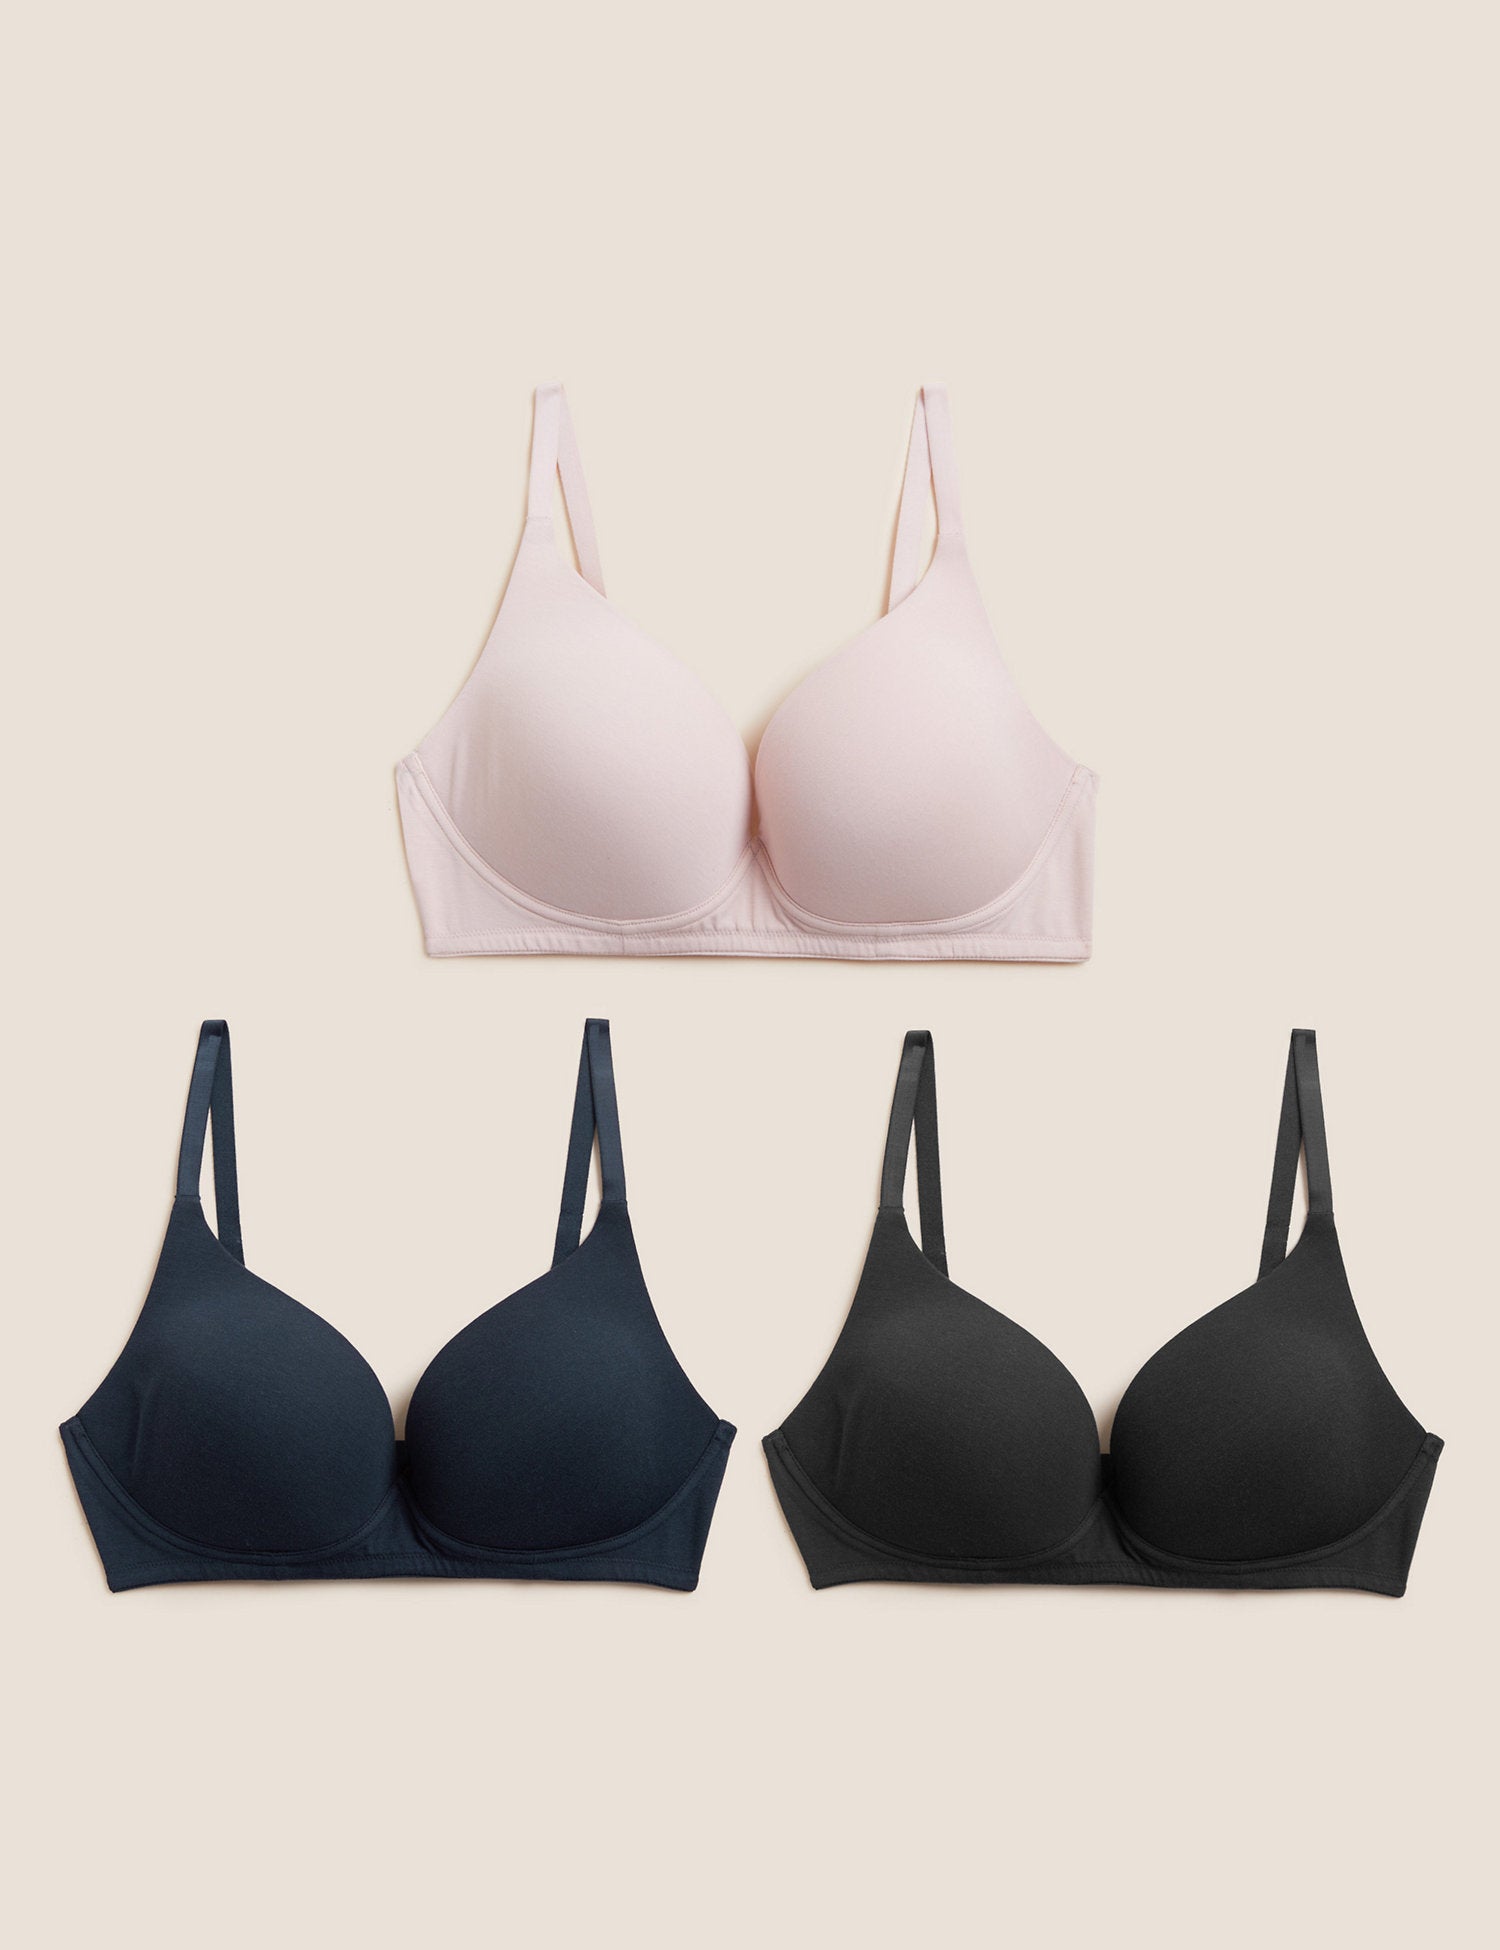 Women Bras 3 pack of No Wire Free T-Shirt Bra B cup C cup D cup Size 40C  (2001)